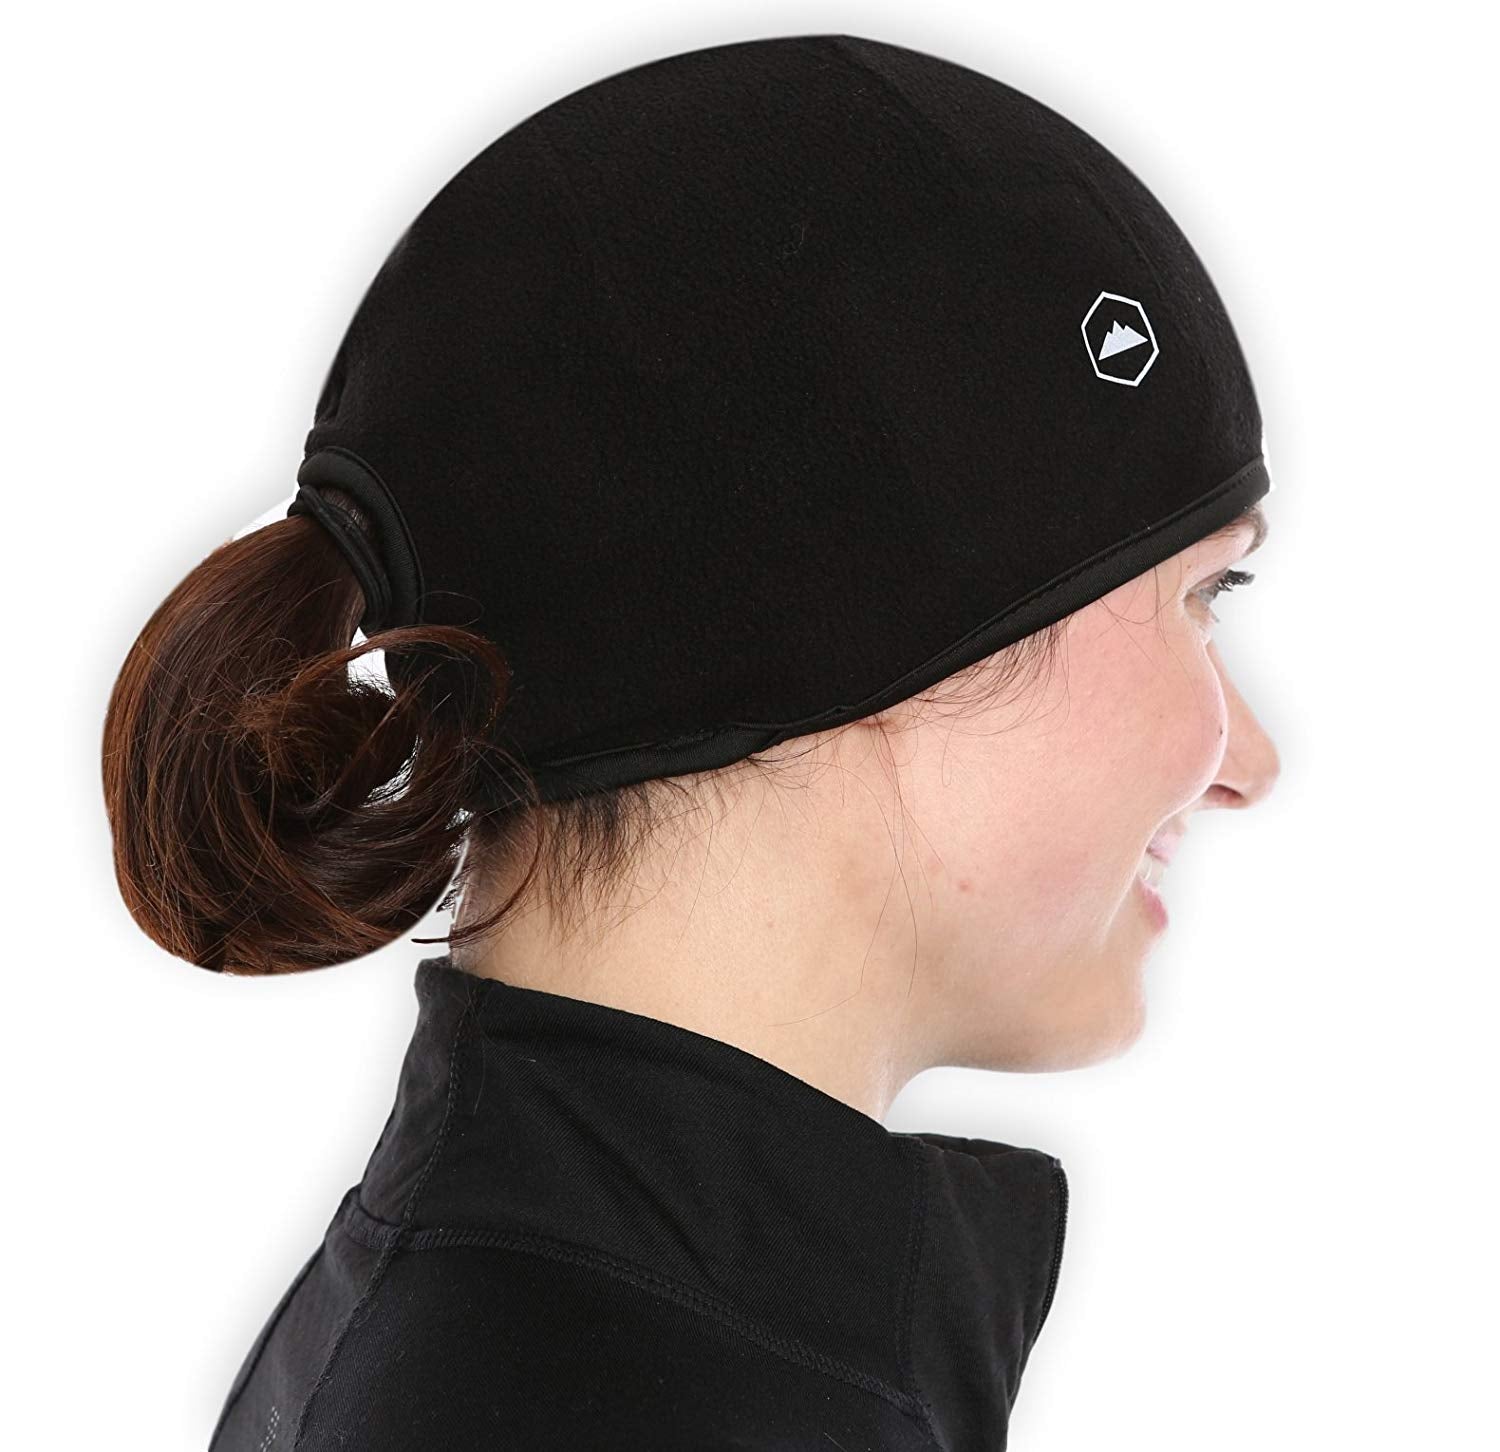 Helmet Liner With Ear Covers Tough Outfitters